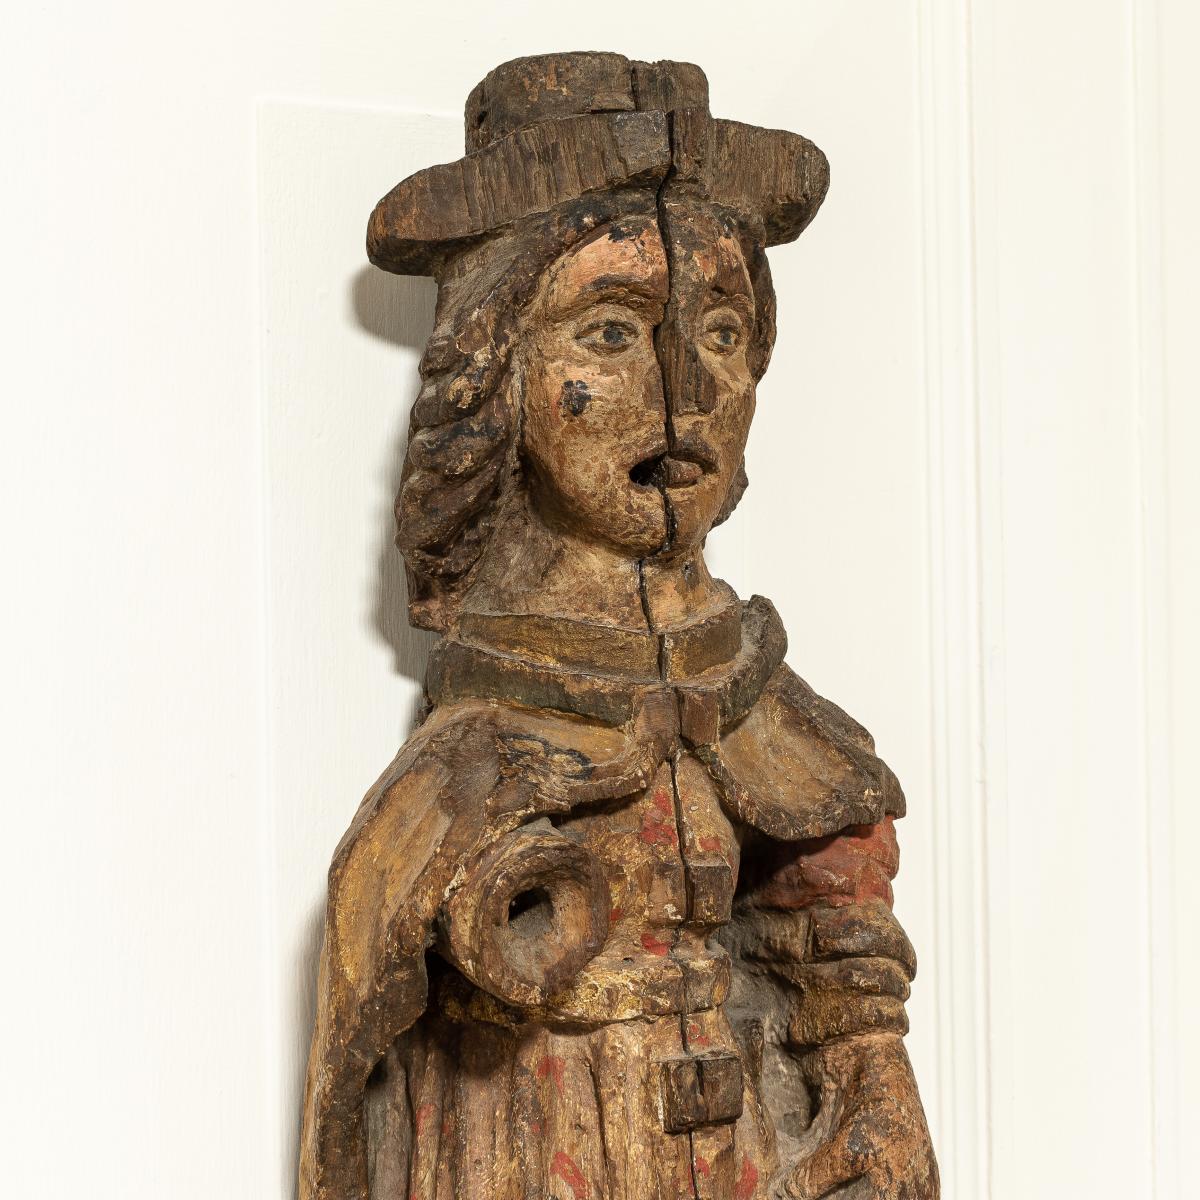 A close up of the top half of a 16th century carved figure